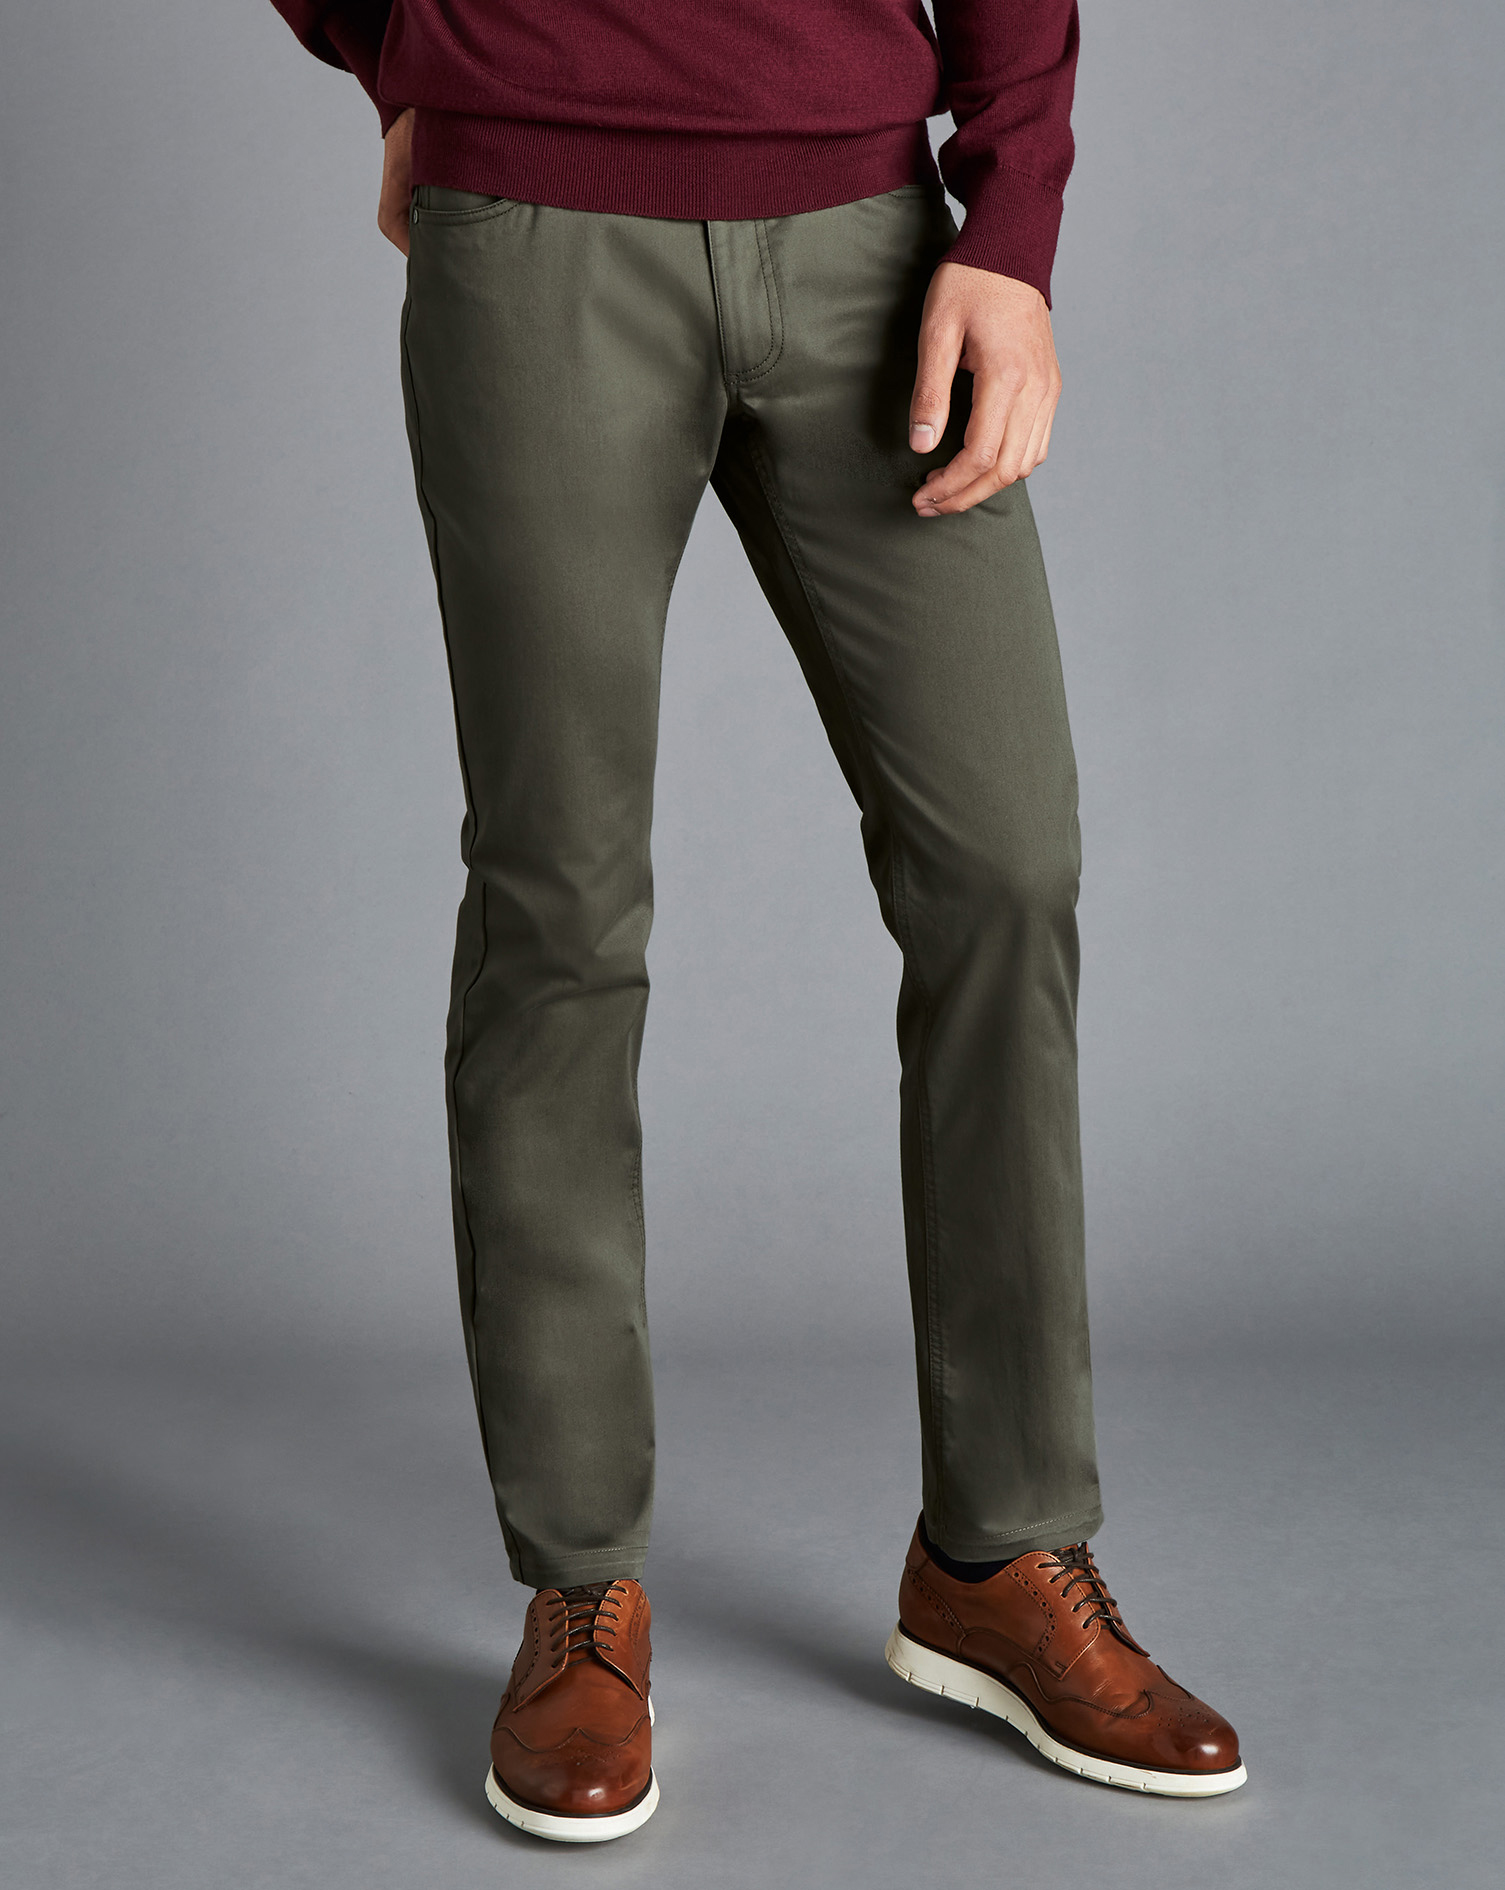 Cotton Stretch 5-Pocket Trousers - Olive Green Size W40 L30
